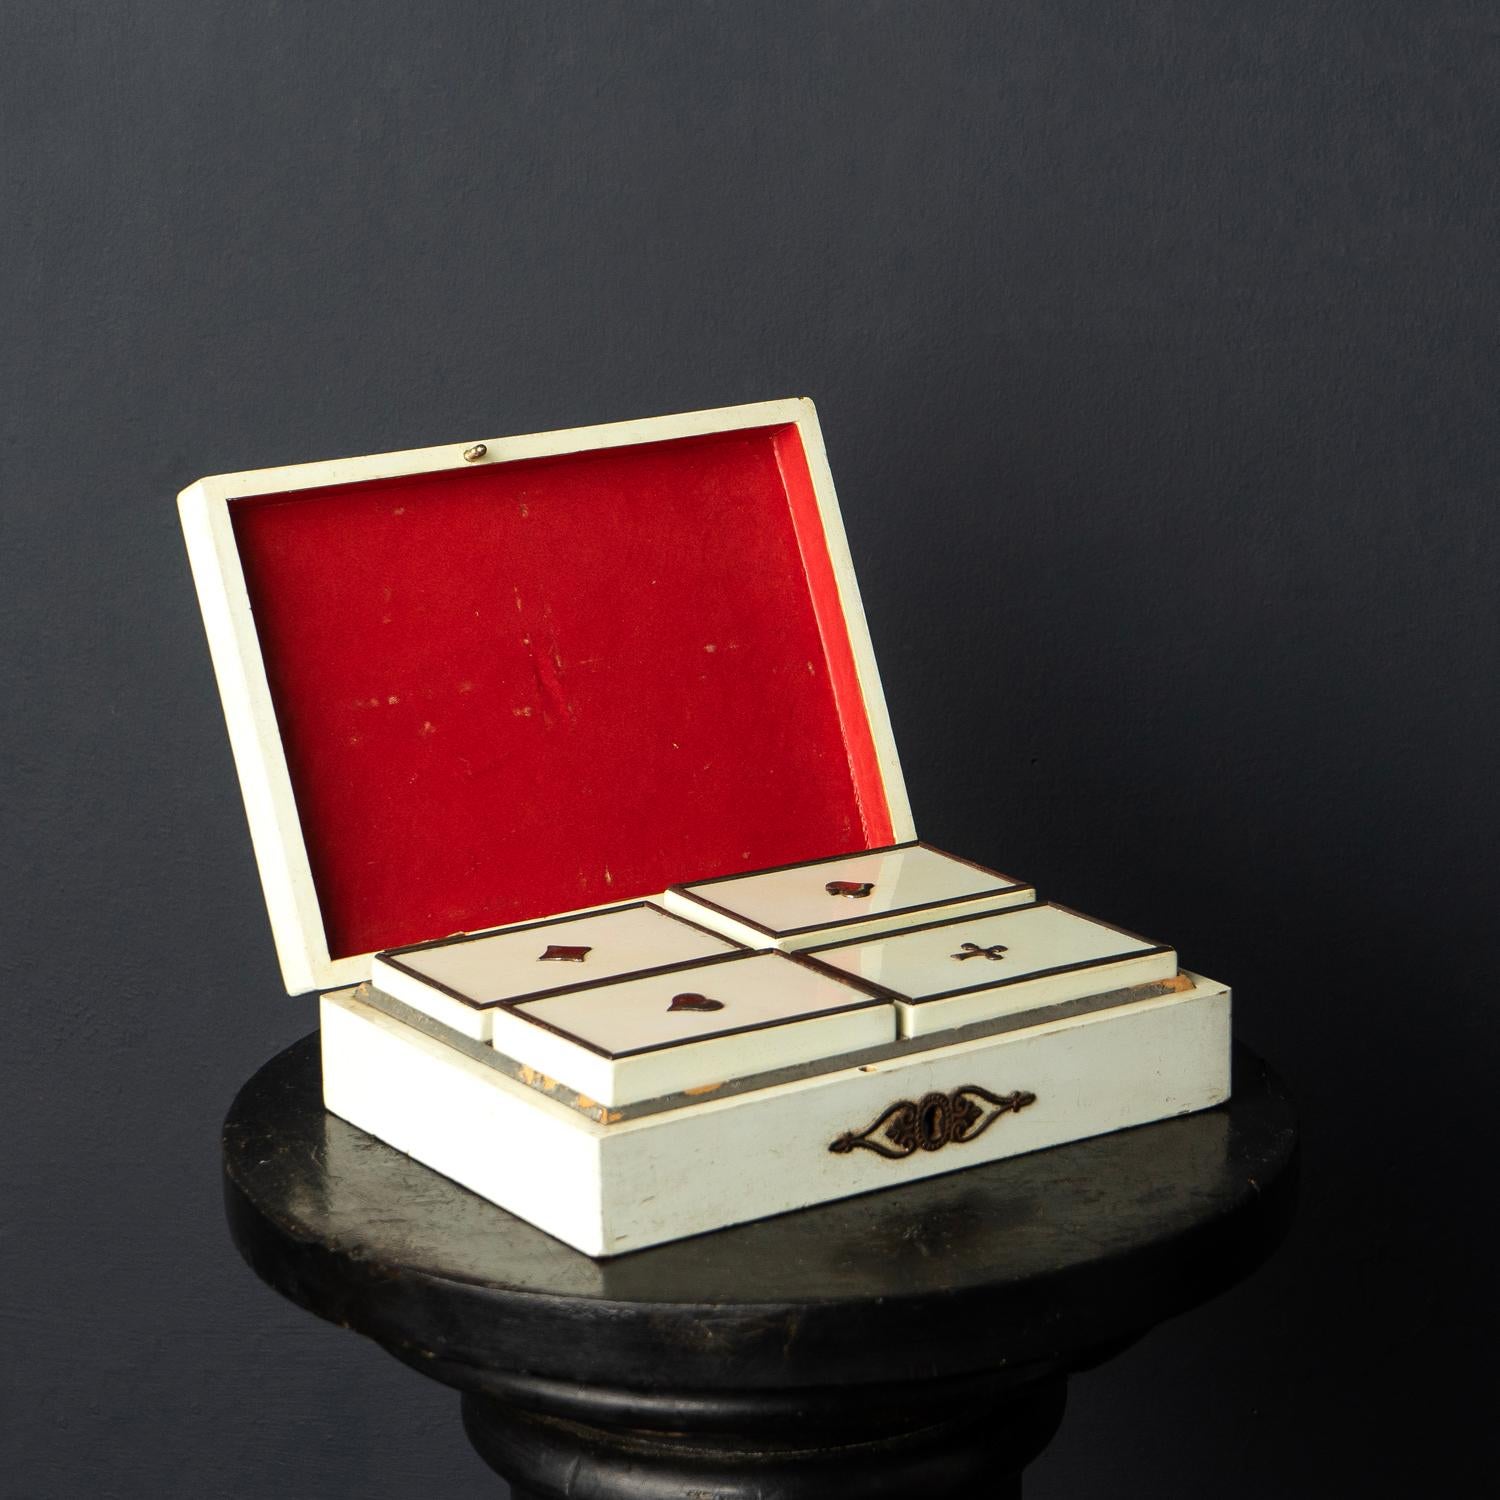 Antique gaming casket with gaming tokens
An unusually white lacquered wooden box with decorative metal mounts which opens up to reveal a red-fitted interior with four removable internal compartments each representing the four different suits,